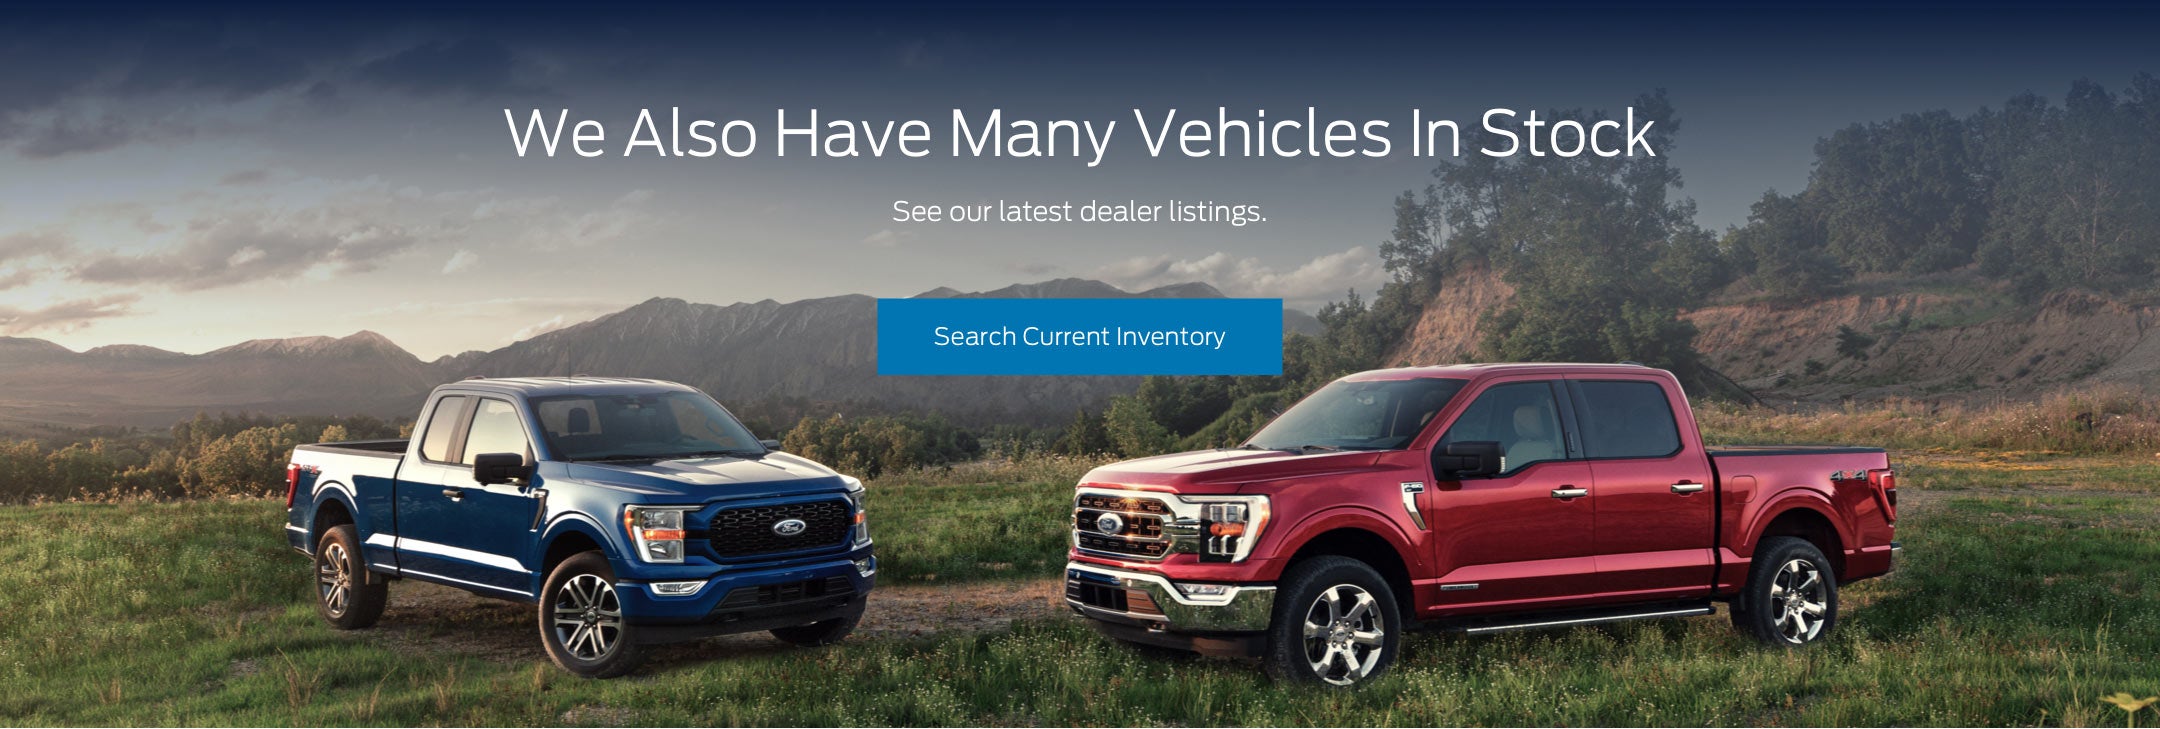 Ford vehicles in stock | Pittsville Motors Inc in Pittsville MD